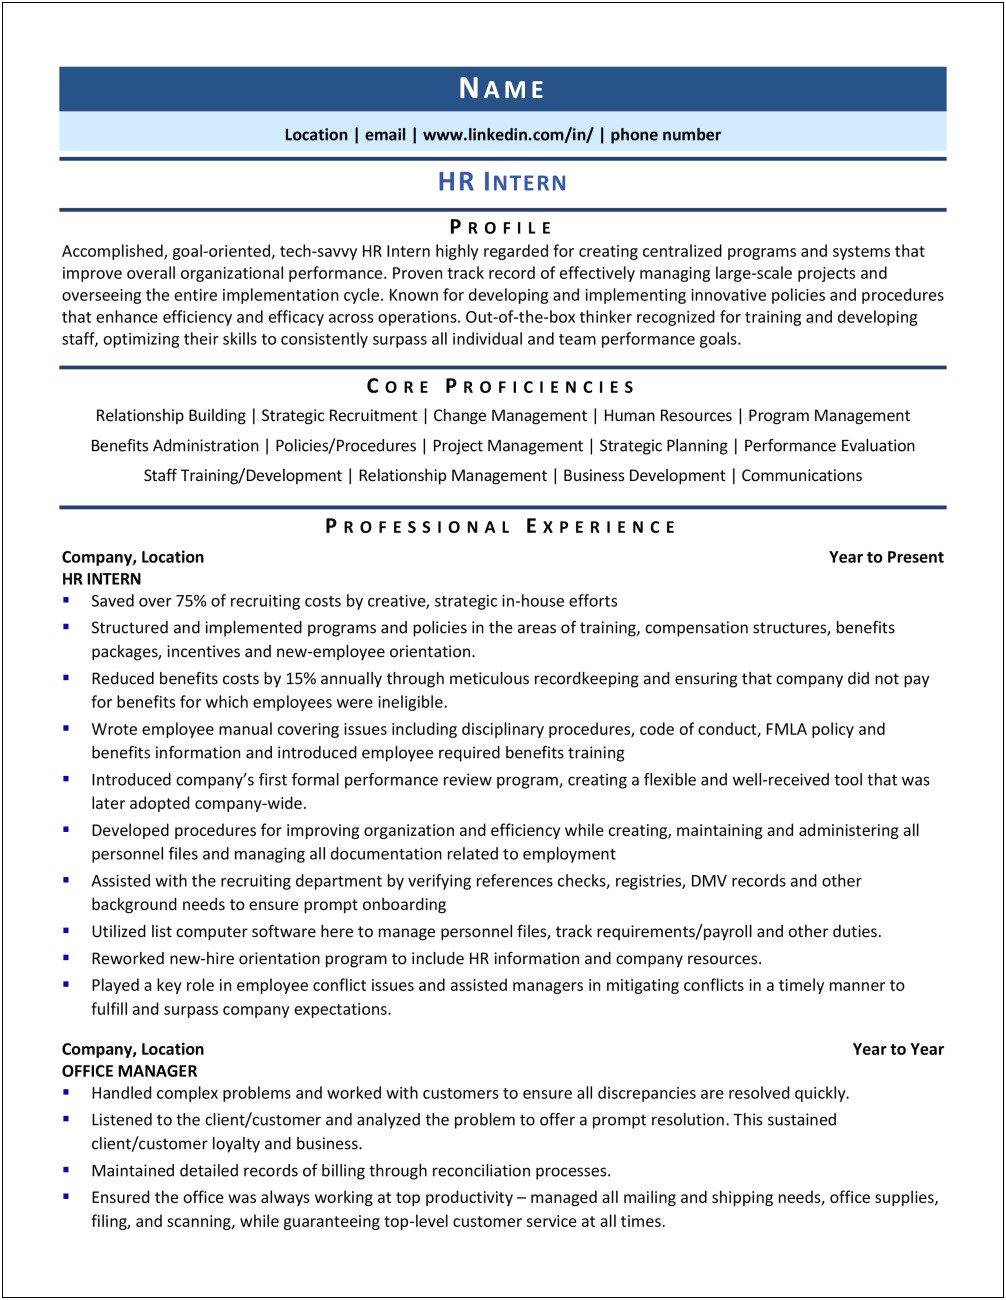 Resume Bullets For Project Management Intern